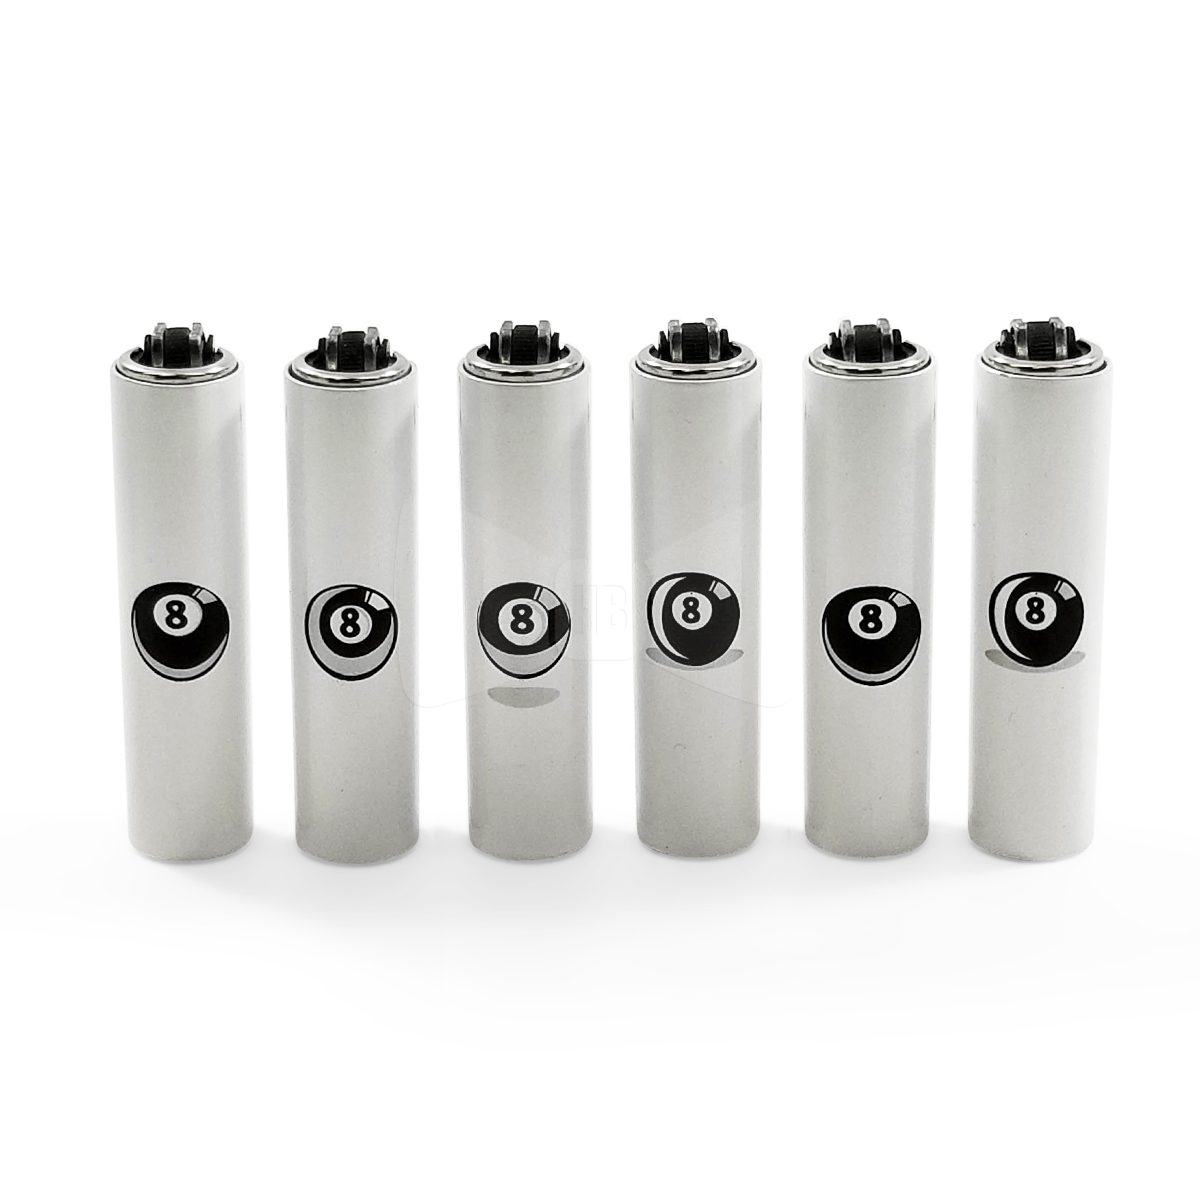 Clipper Metal Cased 8 Ball Lighters 6 Pack